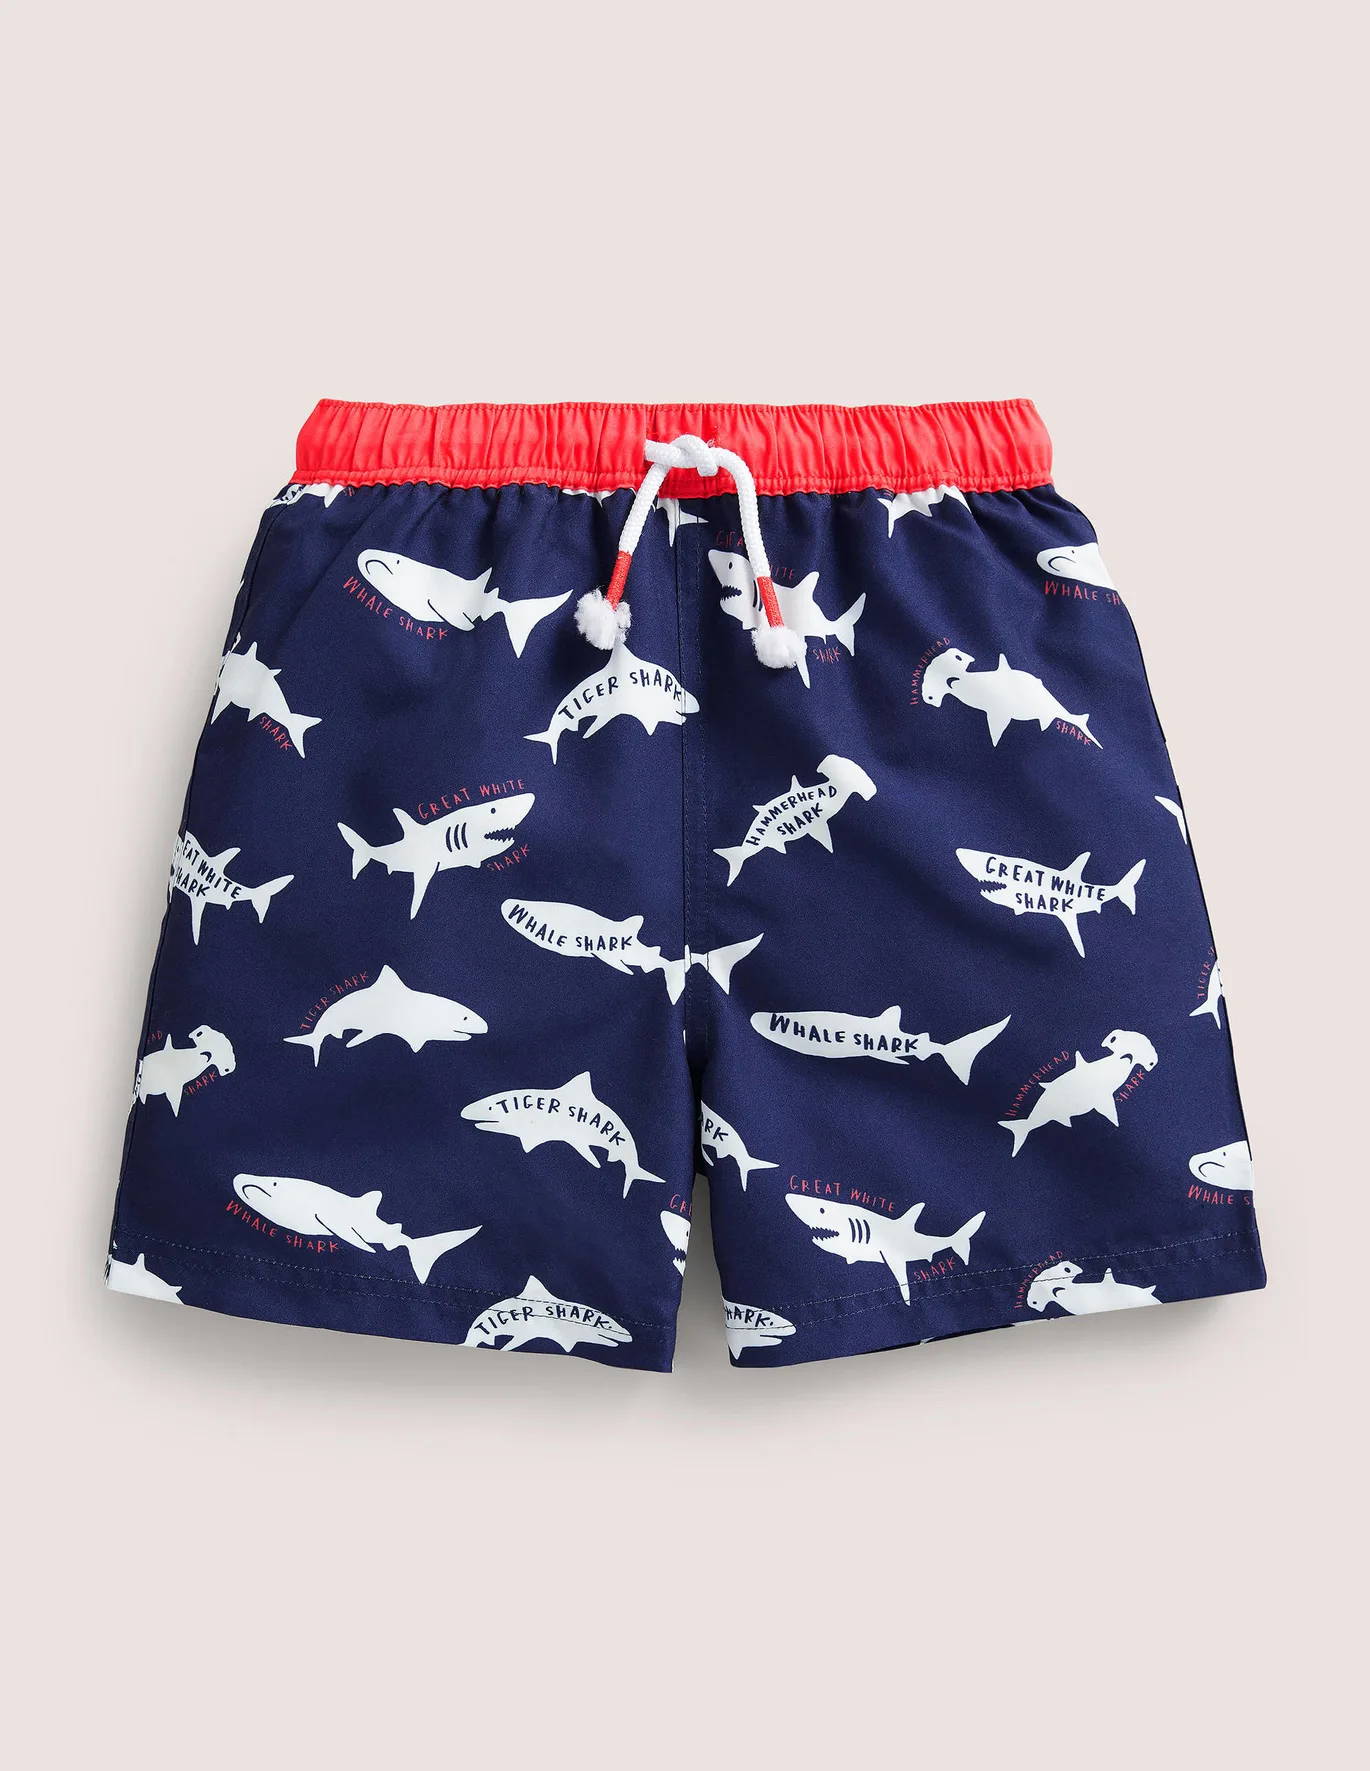 Eco Conscious Swimsuit brands for kids - Green Orchyd